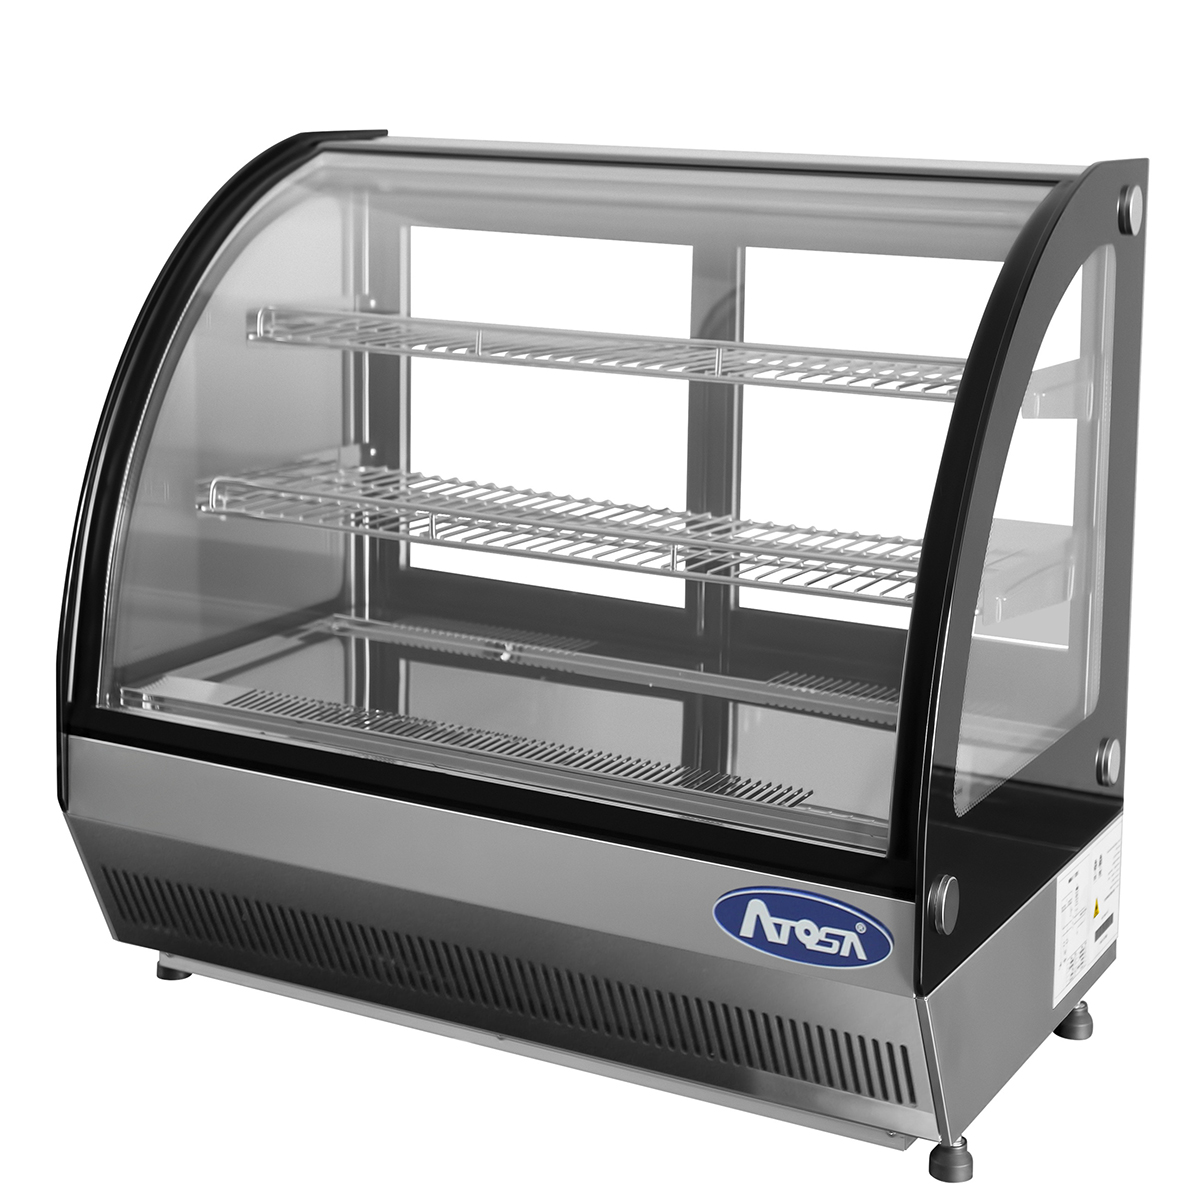 Atosa CRDC-35 Refrigerated Countertop Display Case, 3.5 cu.ft. - 27-3/5"W x 22-1/10"D x 26-2/5"H image 2